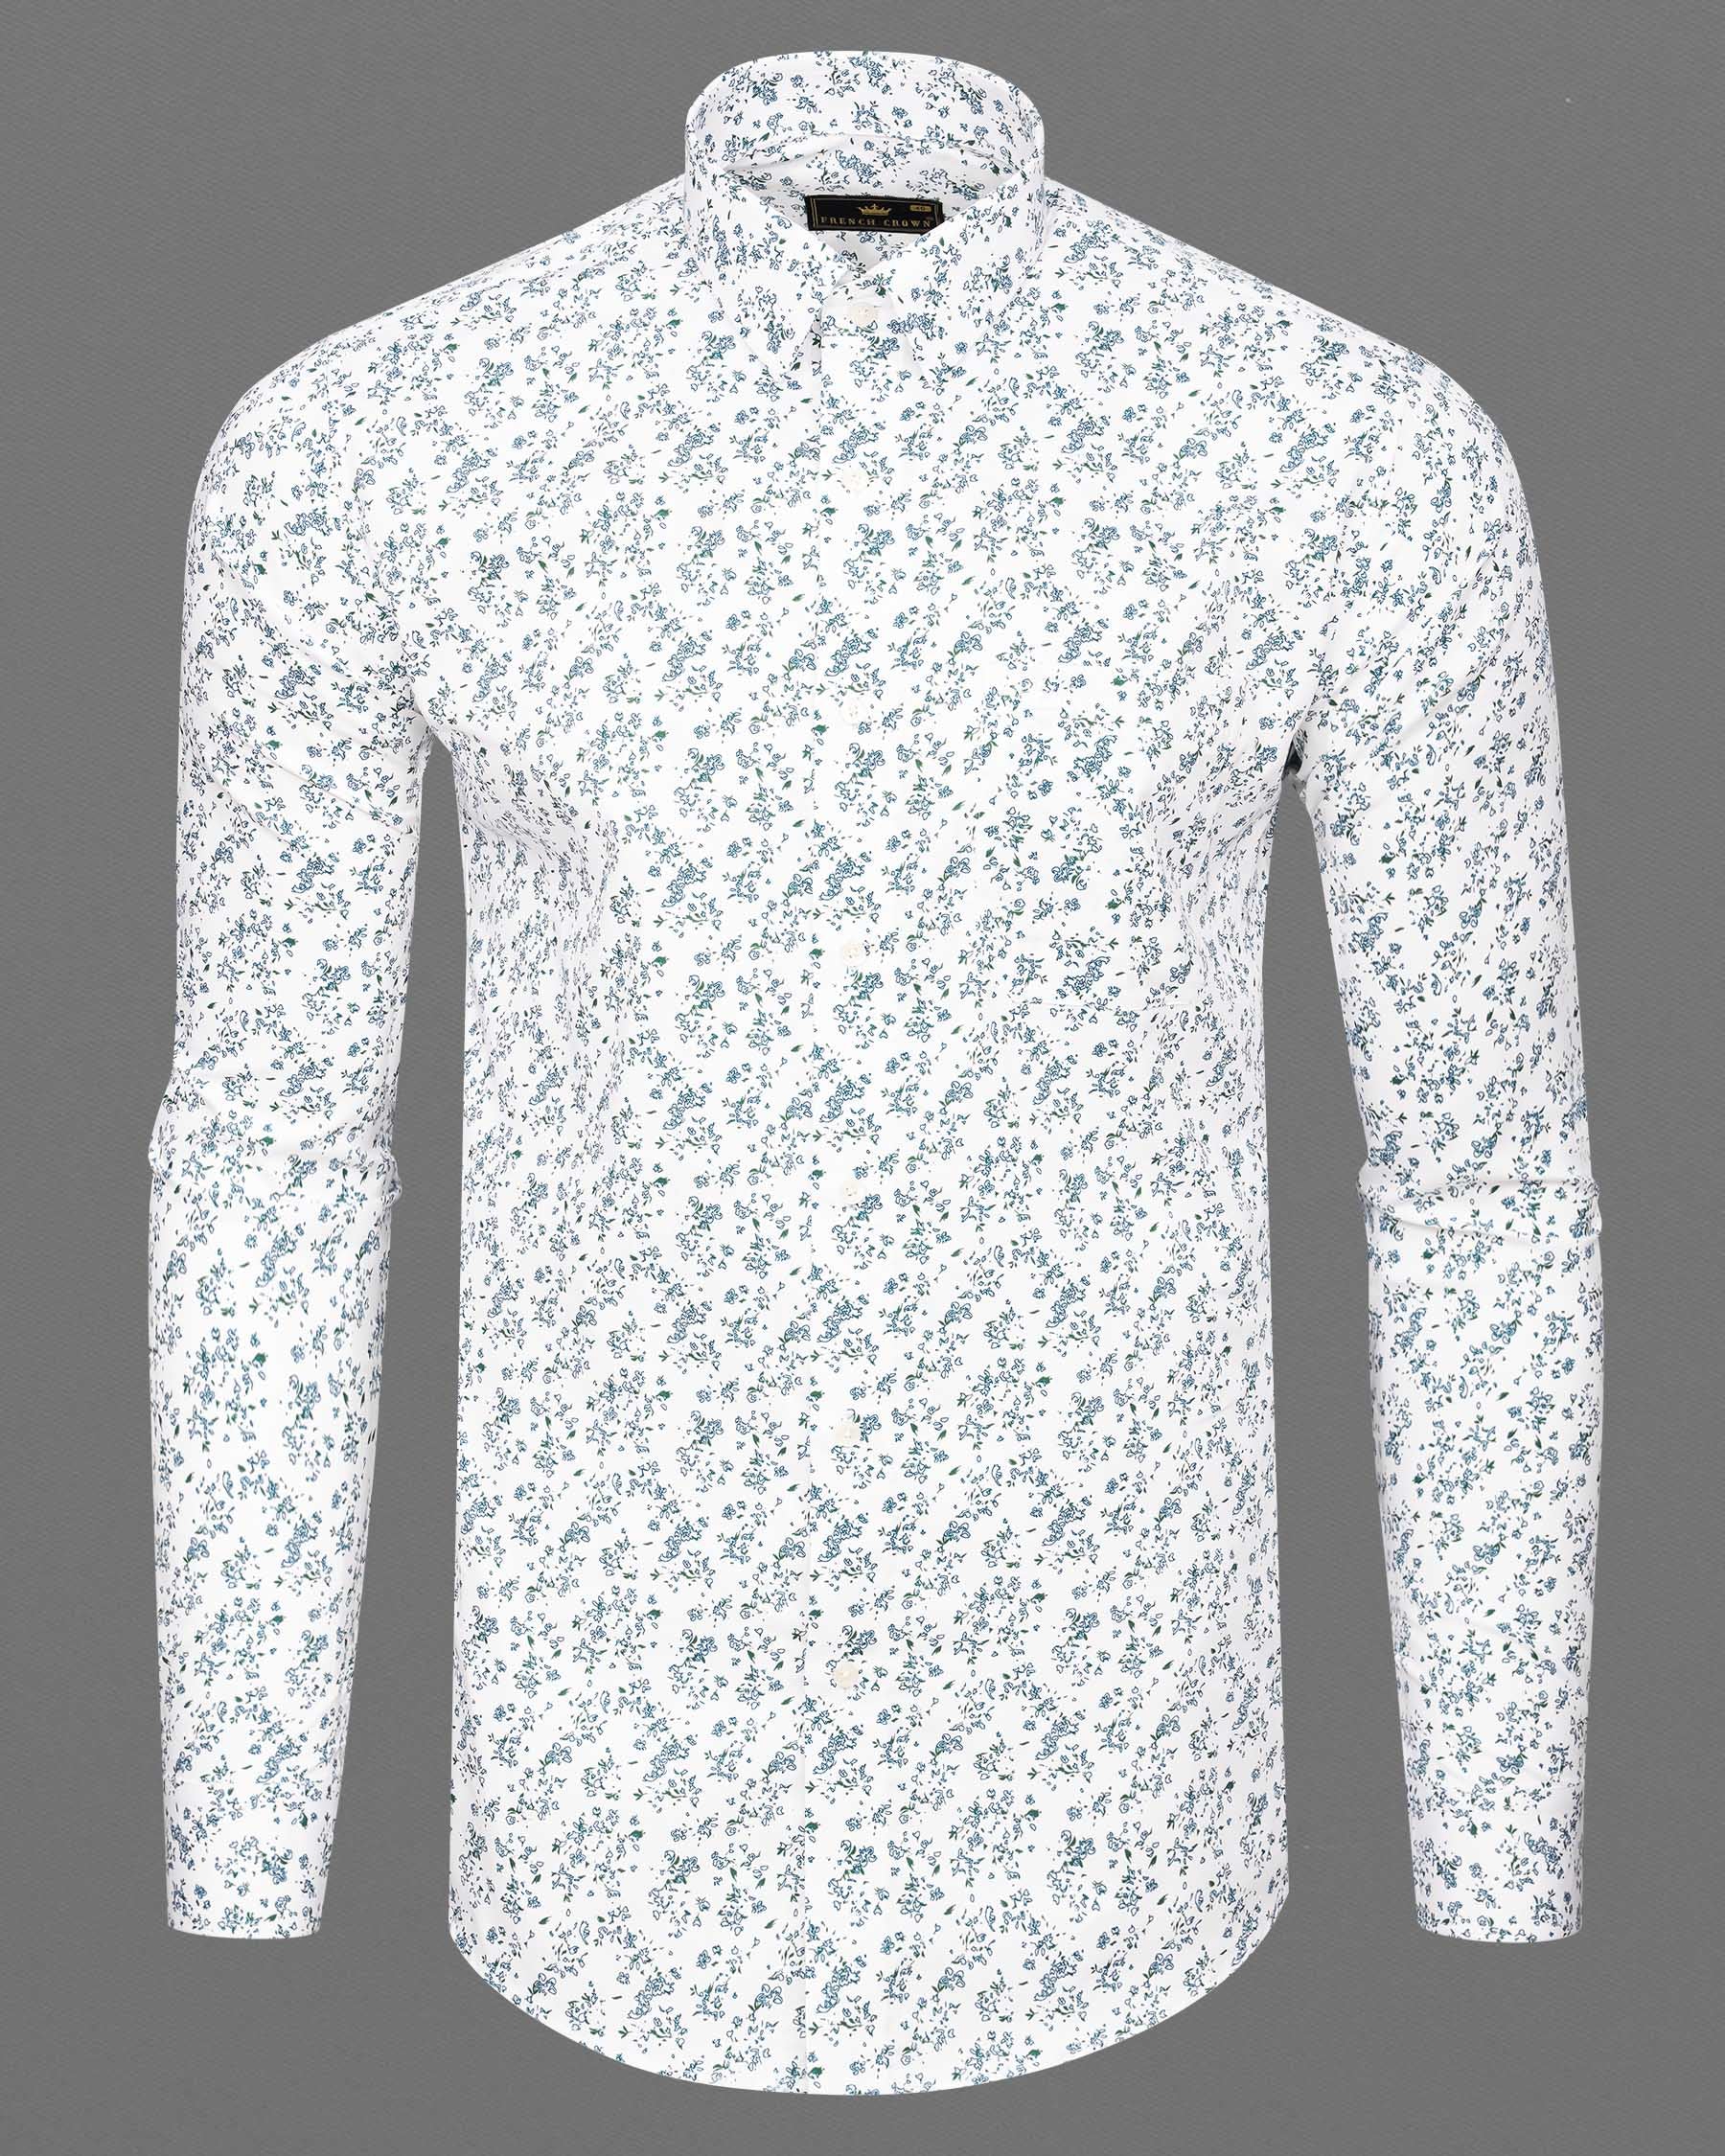 Bright White Quirky Twill Textured With Ditzy Printed Premium Cotton Shirt